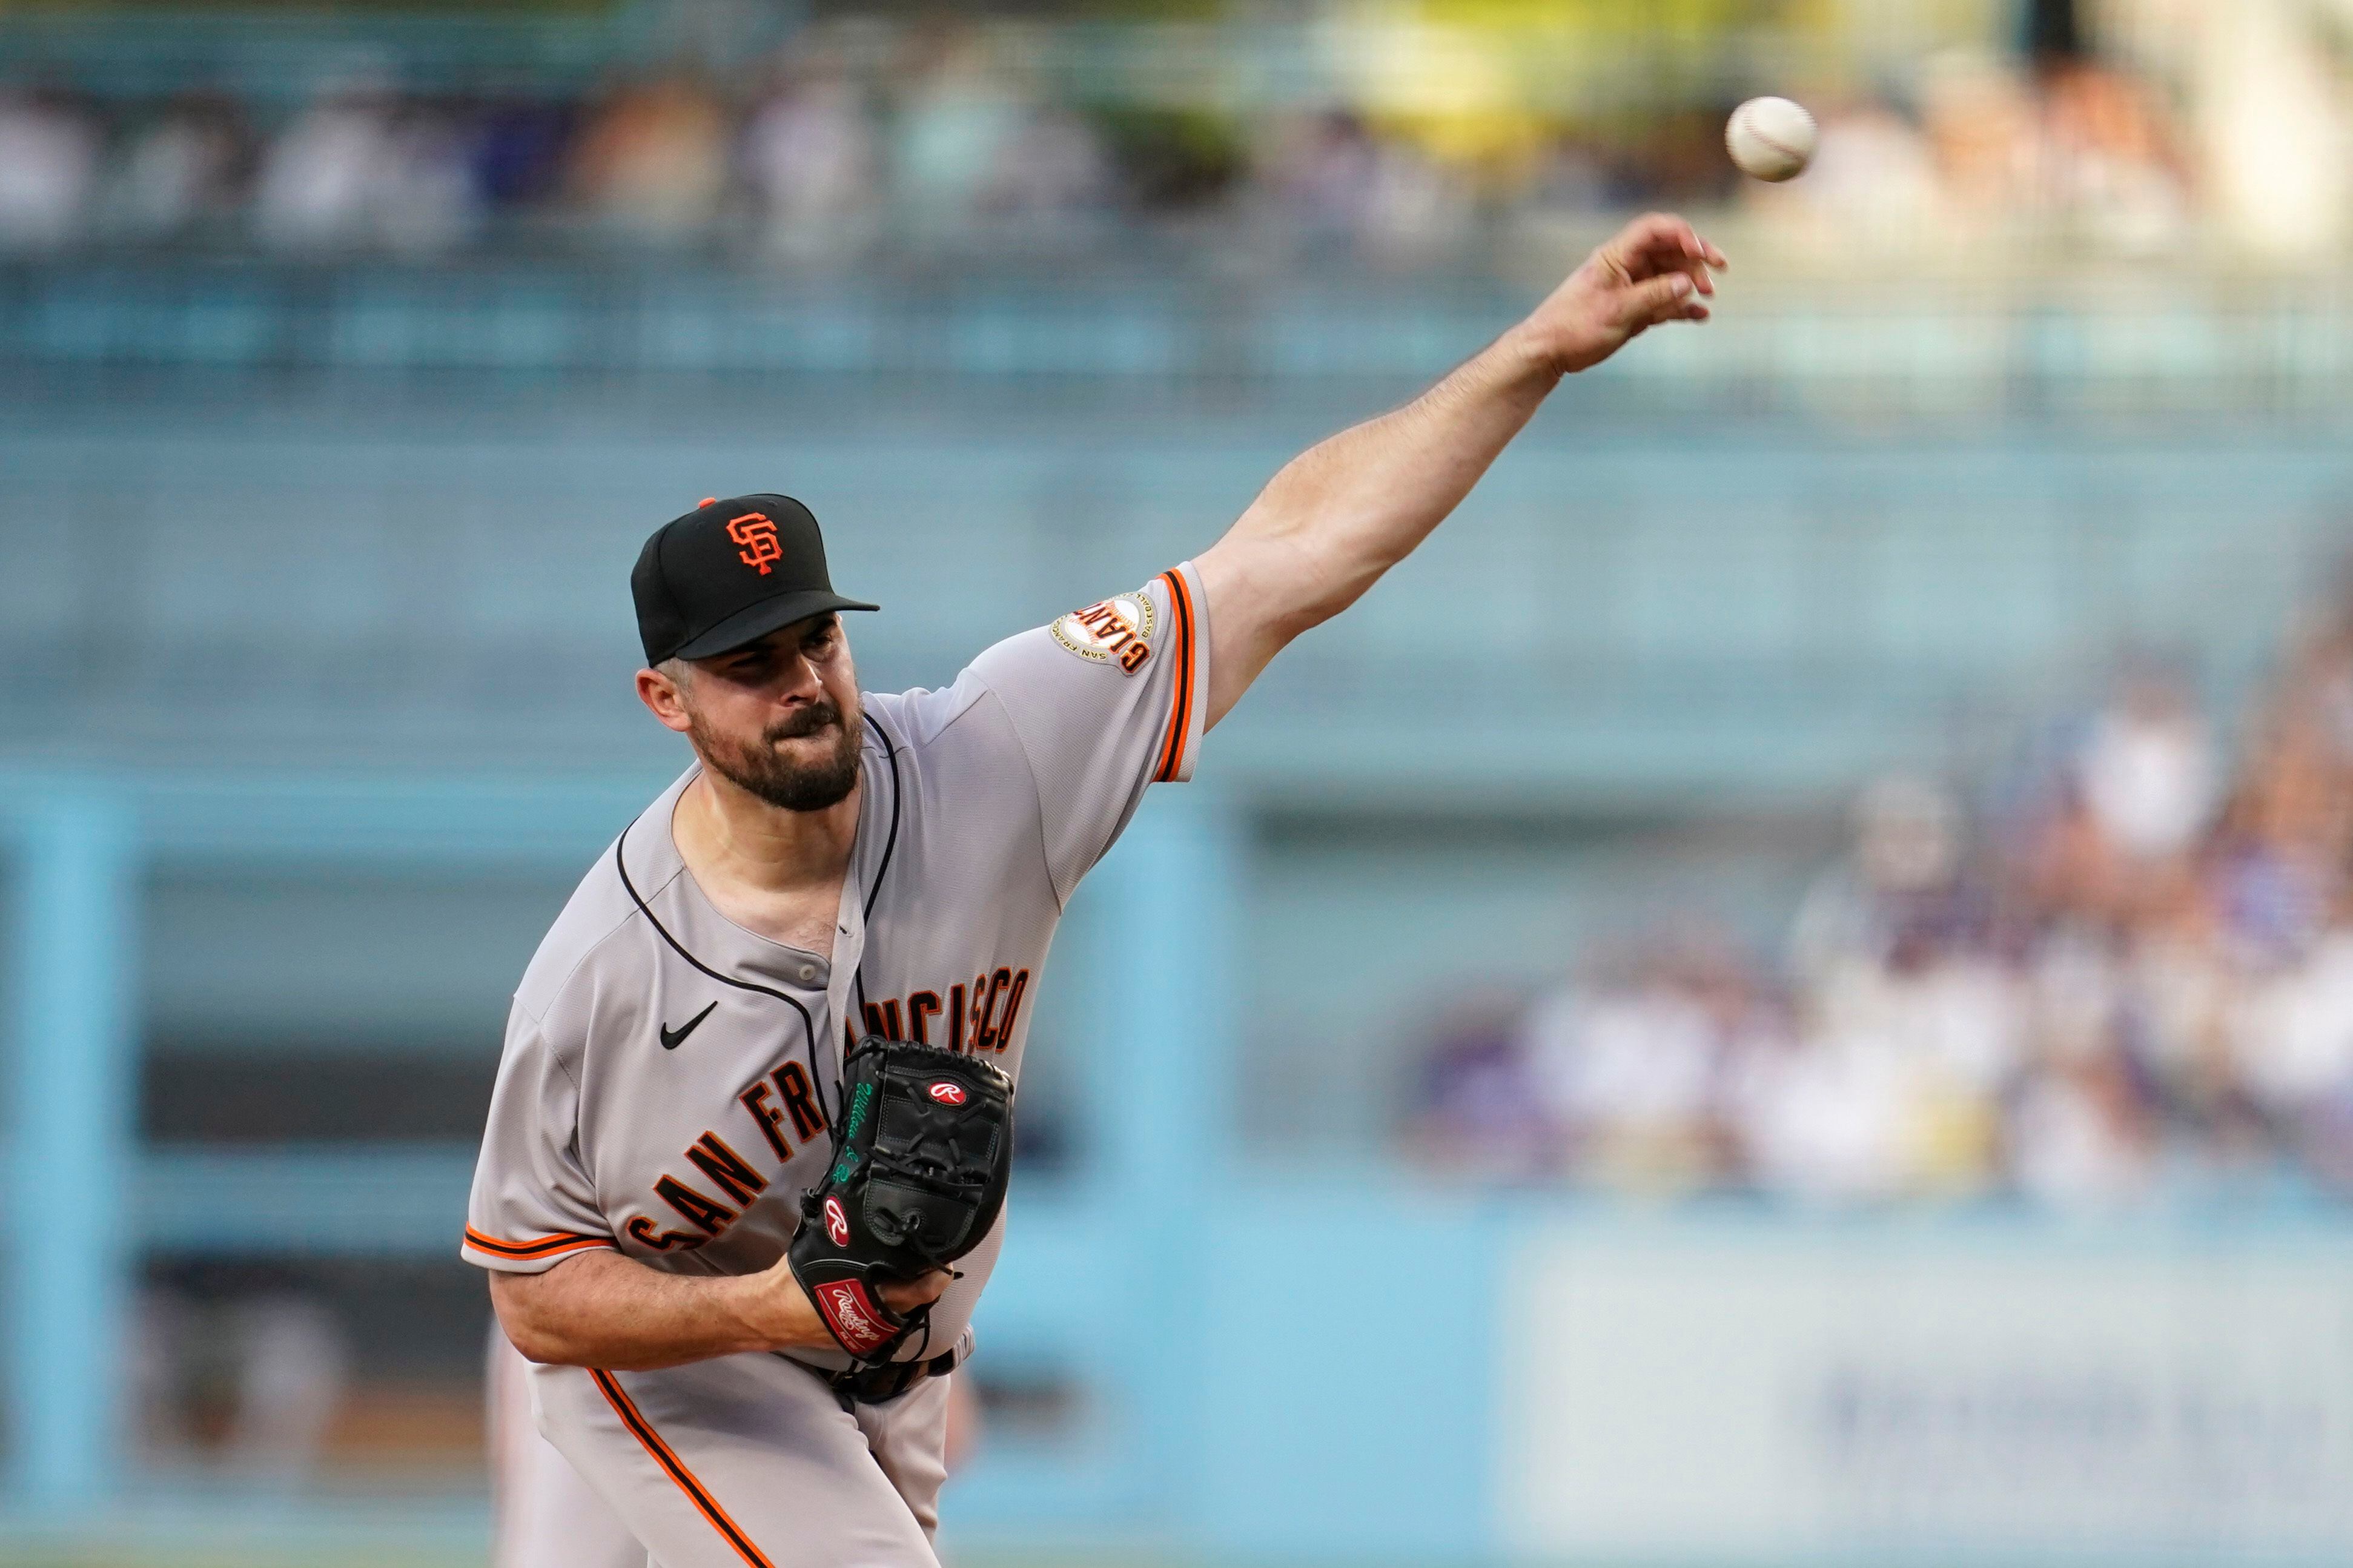 Talent disparity on display as Giants thrashed by Dodgers